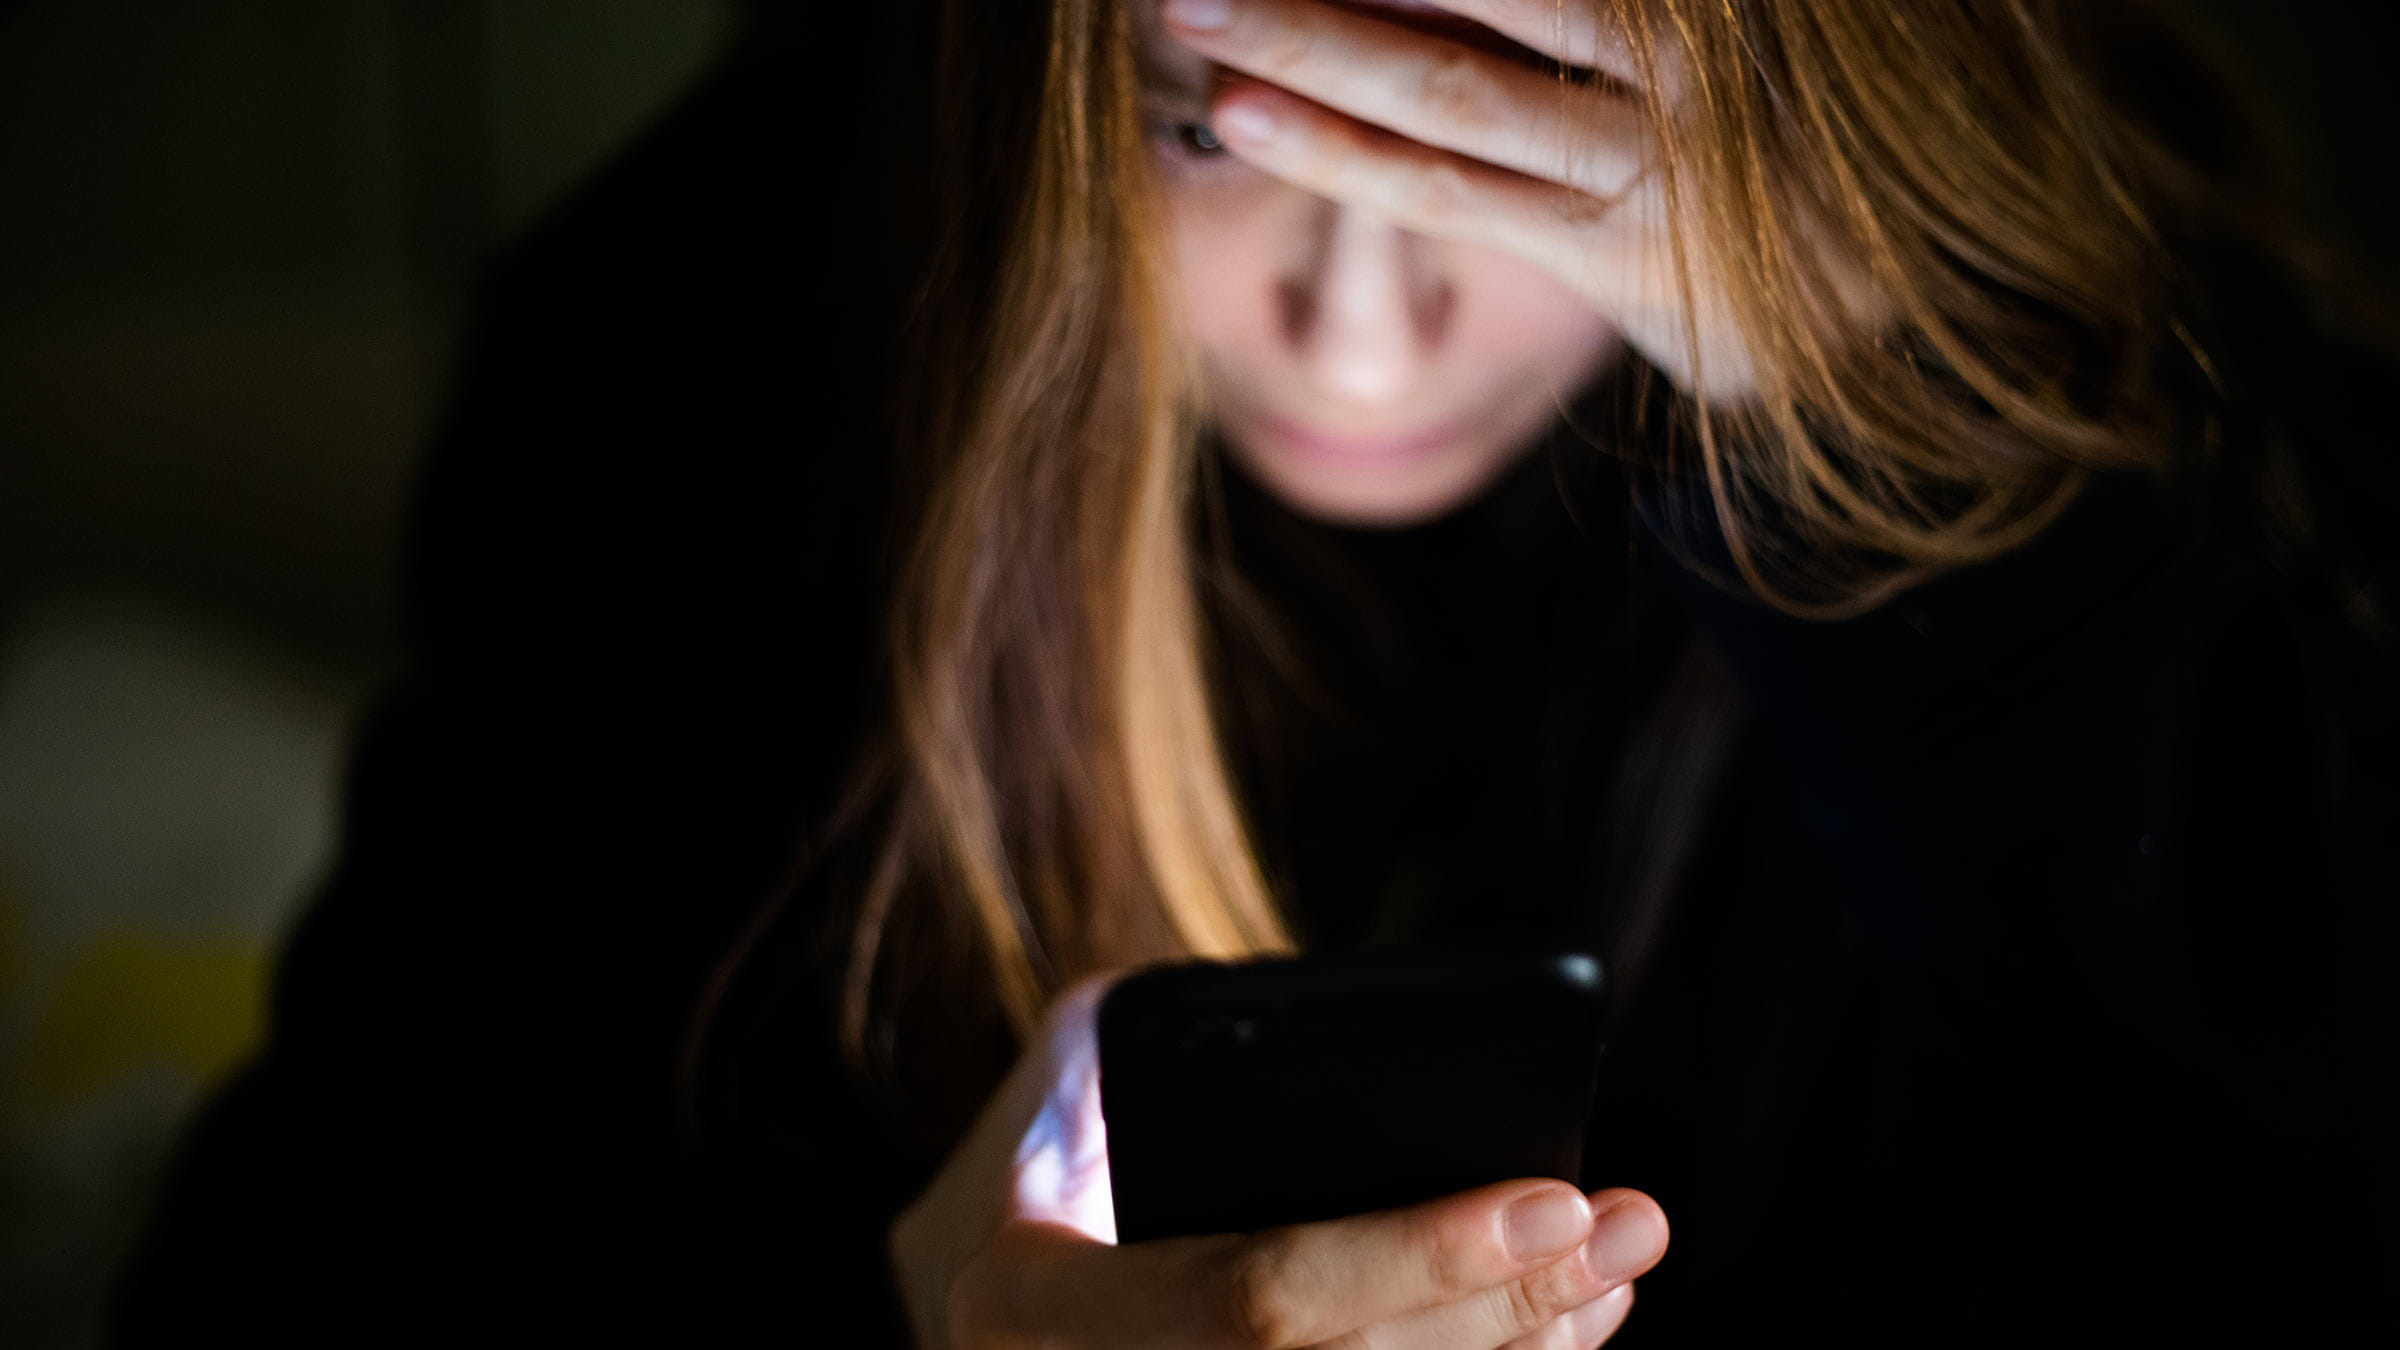 Social media and mental health: Warning signs your friend might not be fine